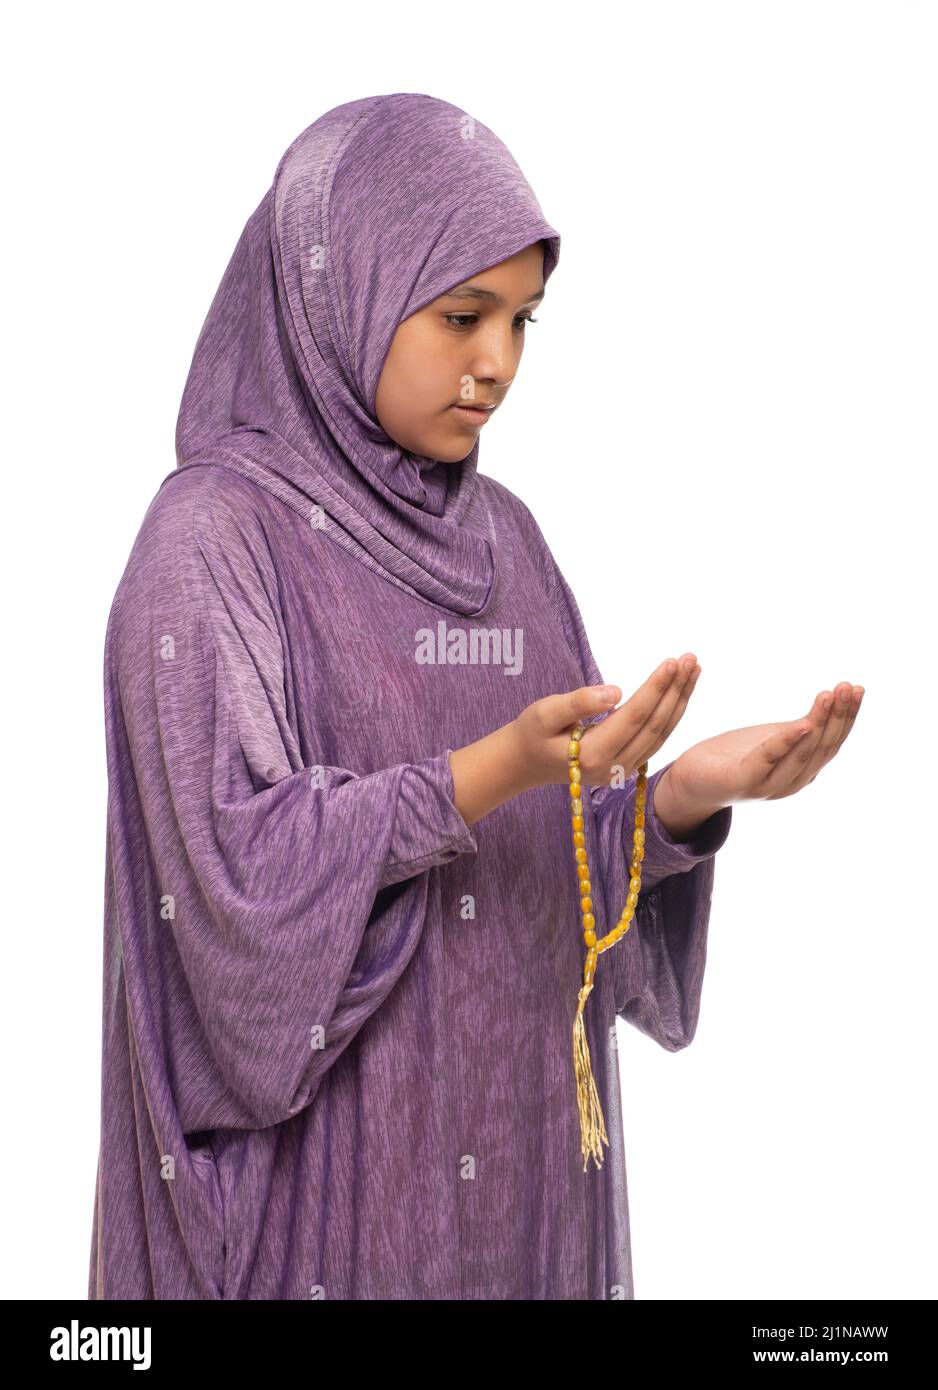 Little Muslim Female Praying for Allah, Girl with Prayer Costume and Rosary, Ramadan Kareem Concept, Isolated on White Background Stock Photo